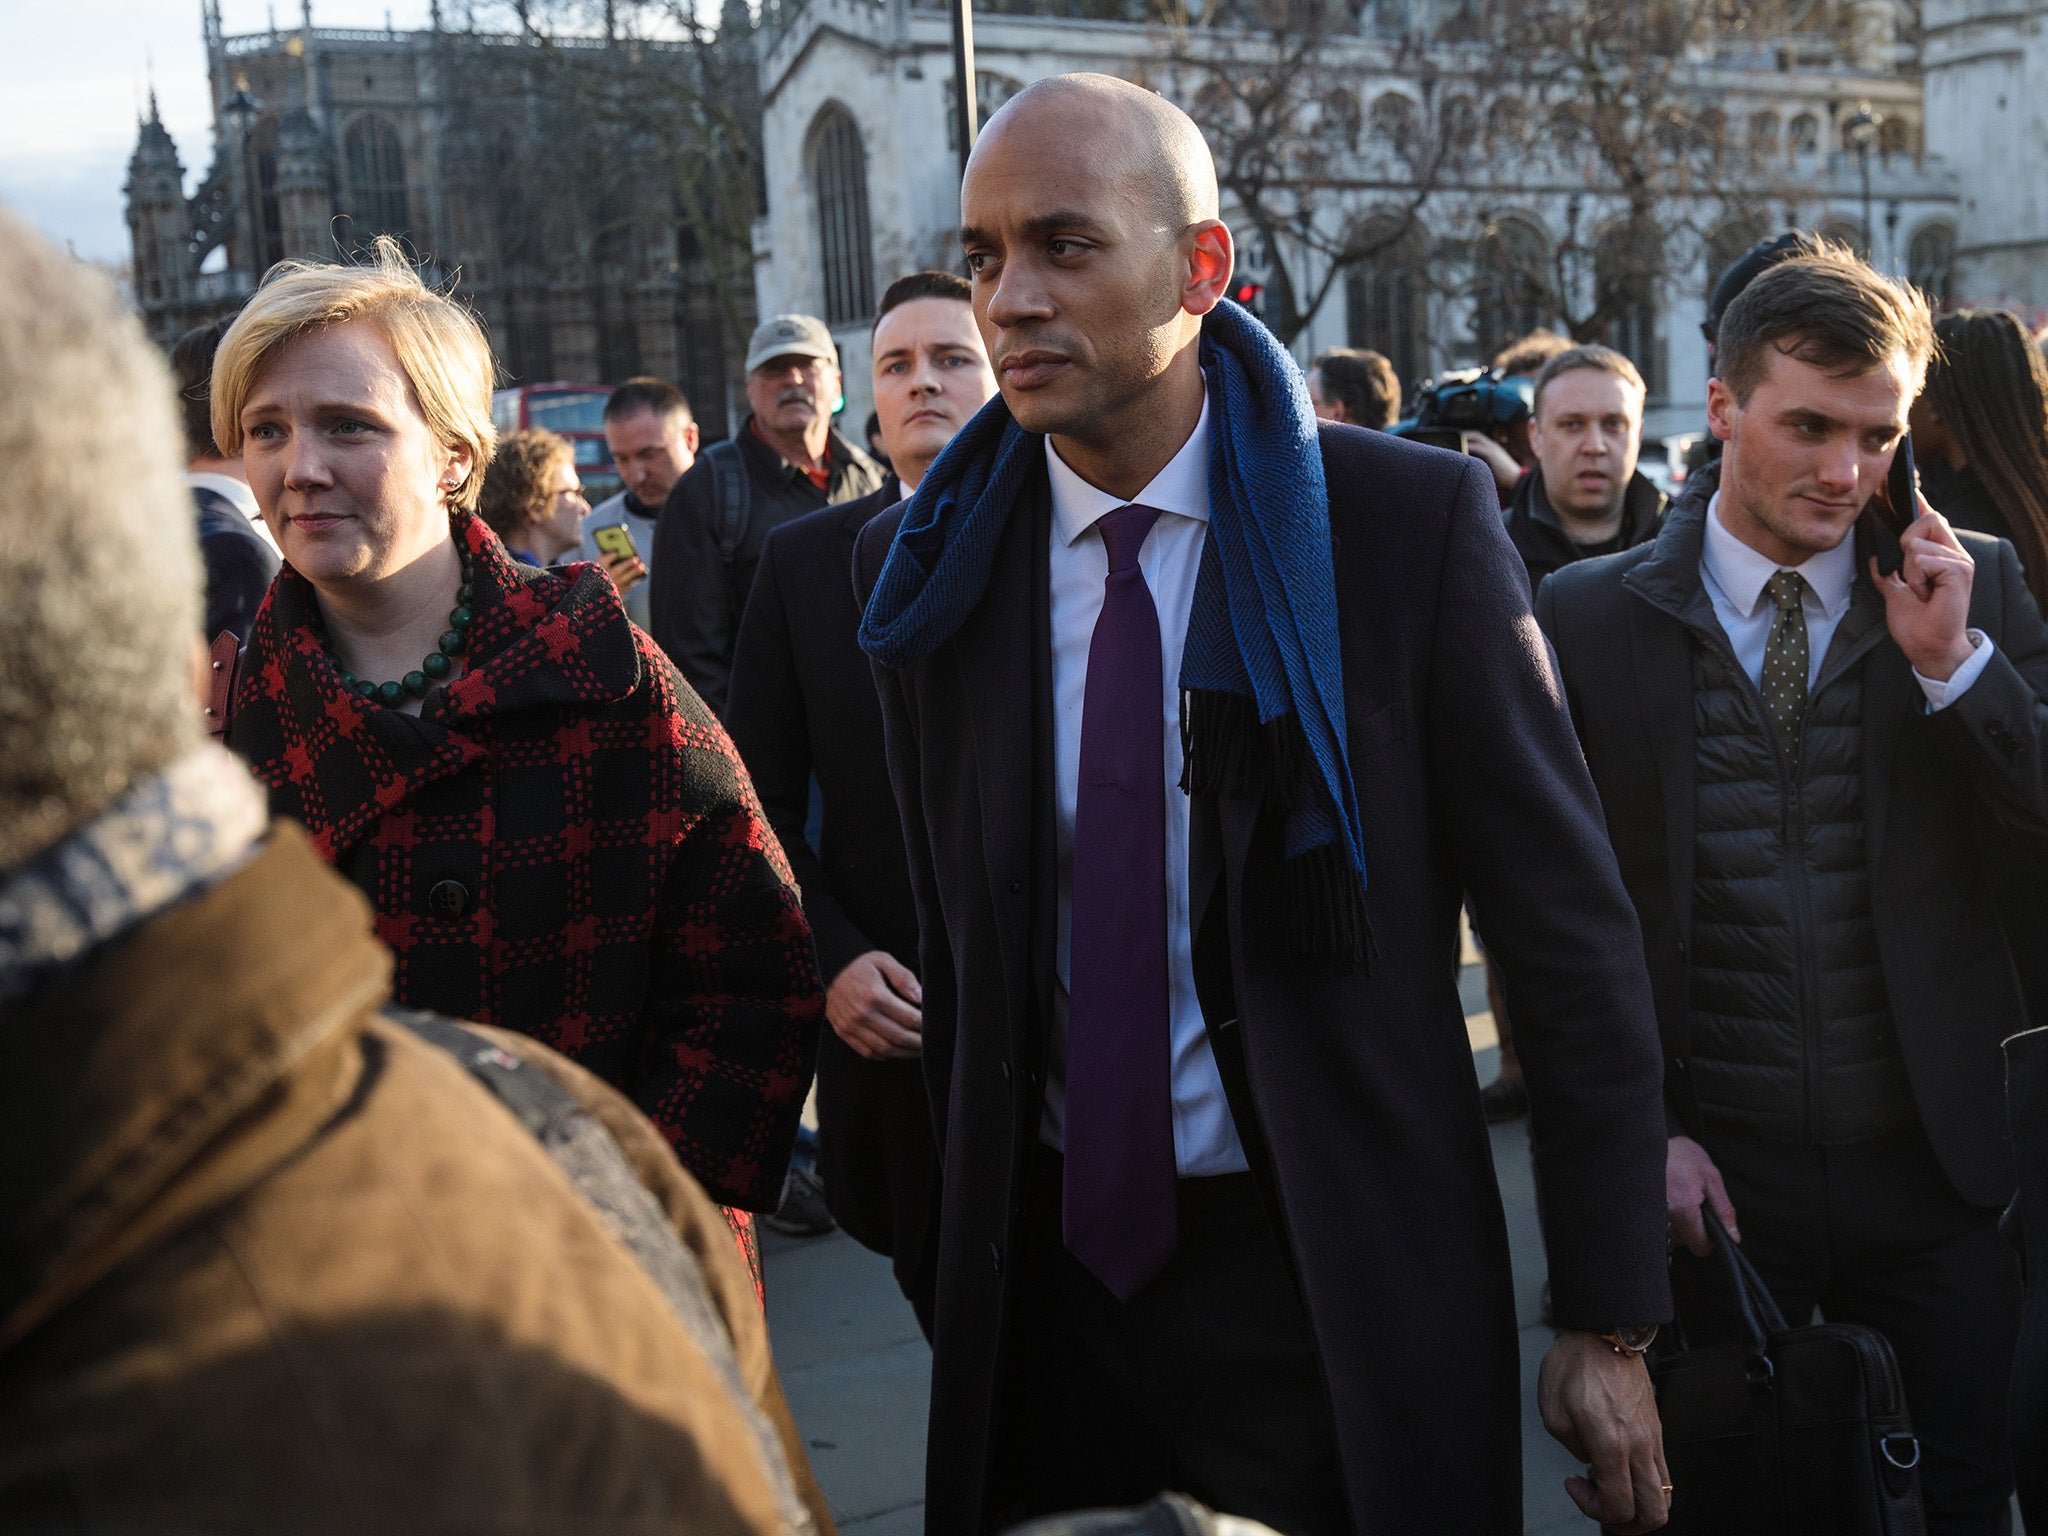 Chuka Umunna wrote for The Independent on the Labour Party’s problem with antisemitism